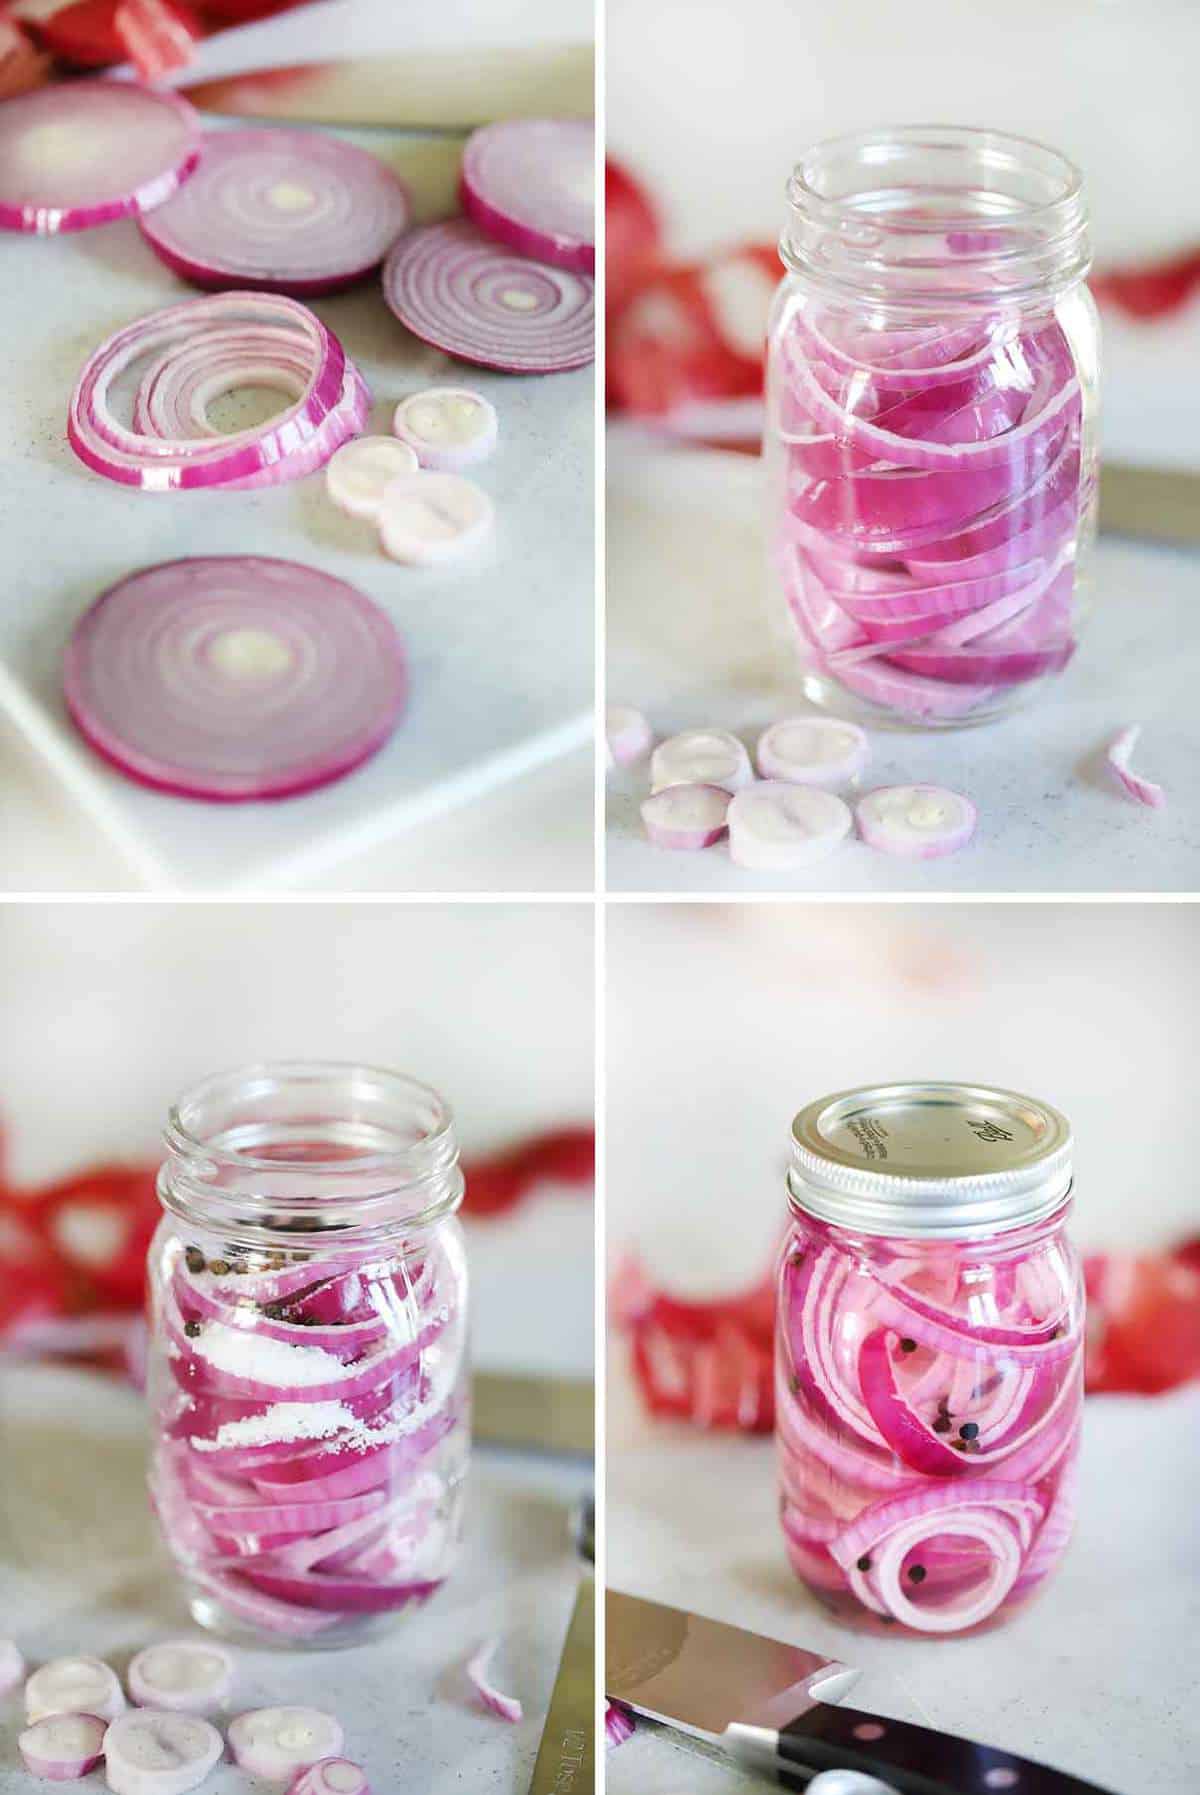 Process collage showing how to make pickled red onions.